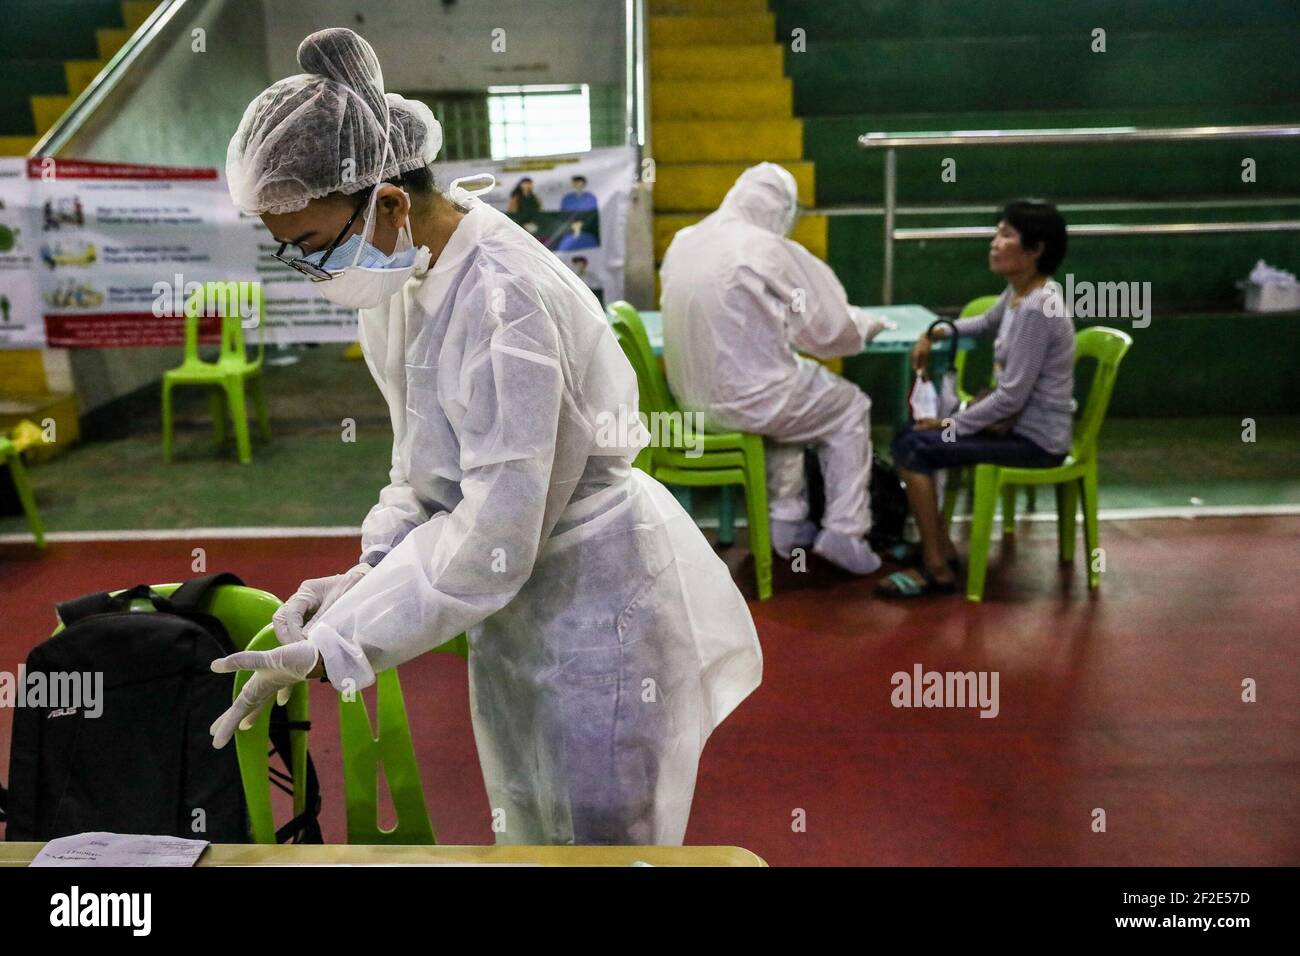 Health workers assist residents at a free COVID-19 swab test inside a gymnasium in Navotas city, Manila, Philippines. Stock Photo